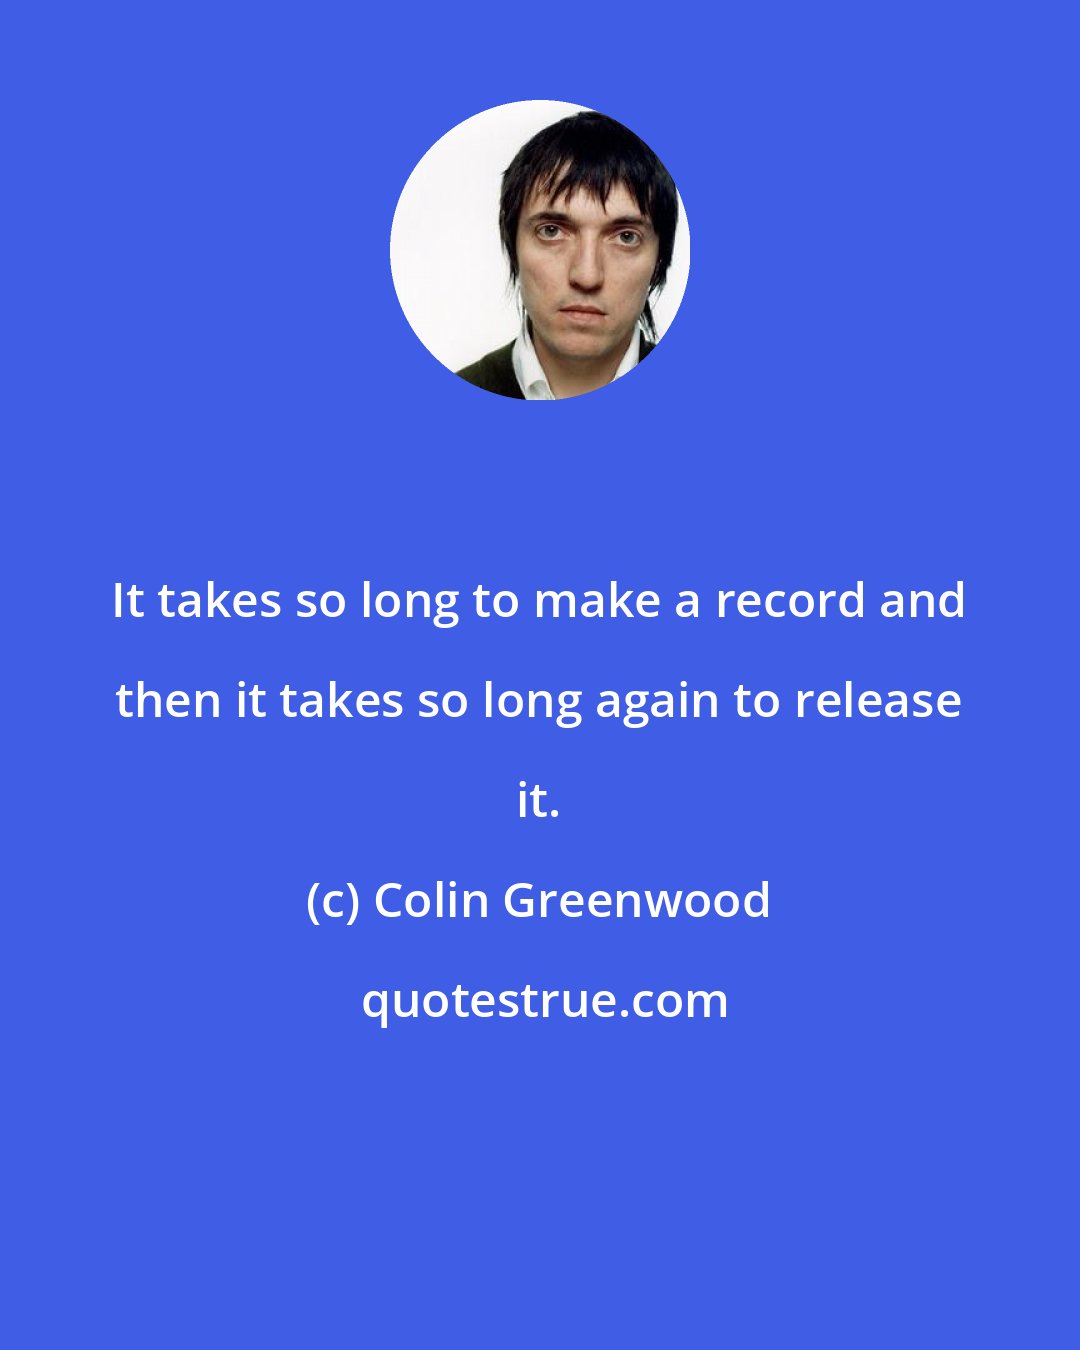 Colin Greenwood: It takes so long to make a record and then it takes so long again to release it.